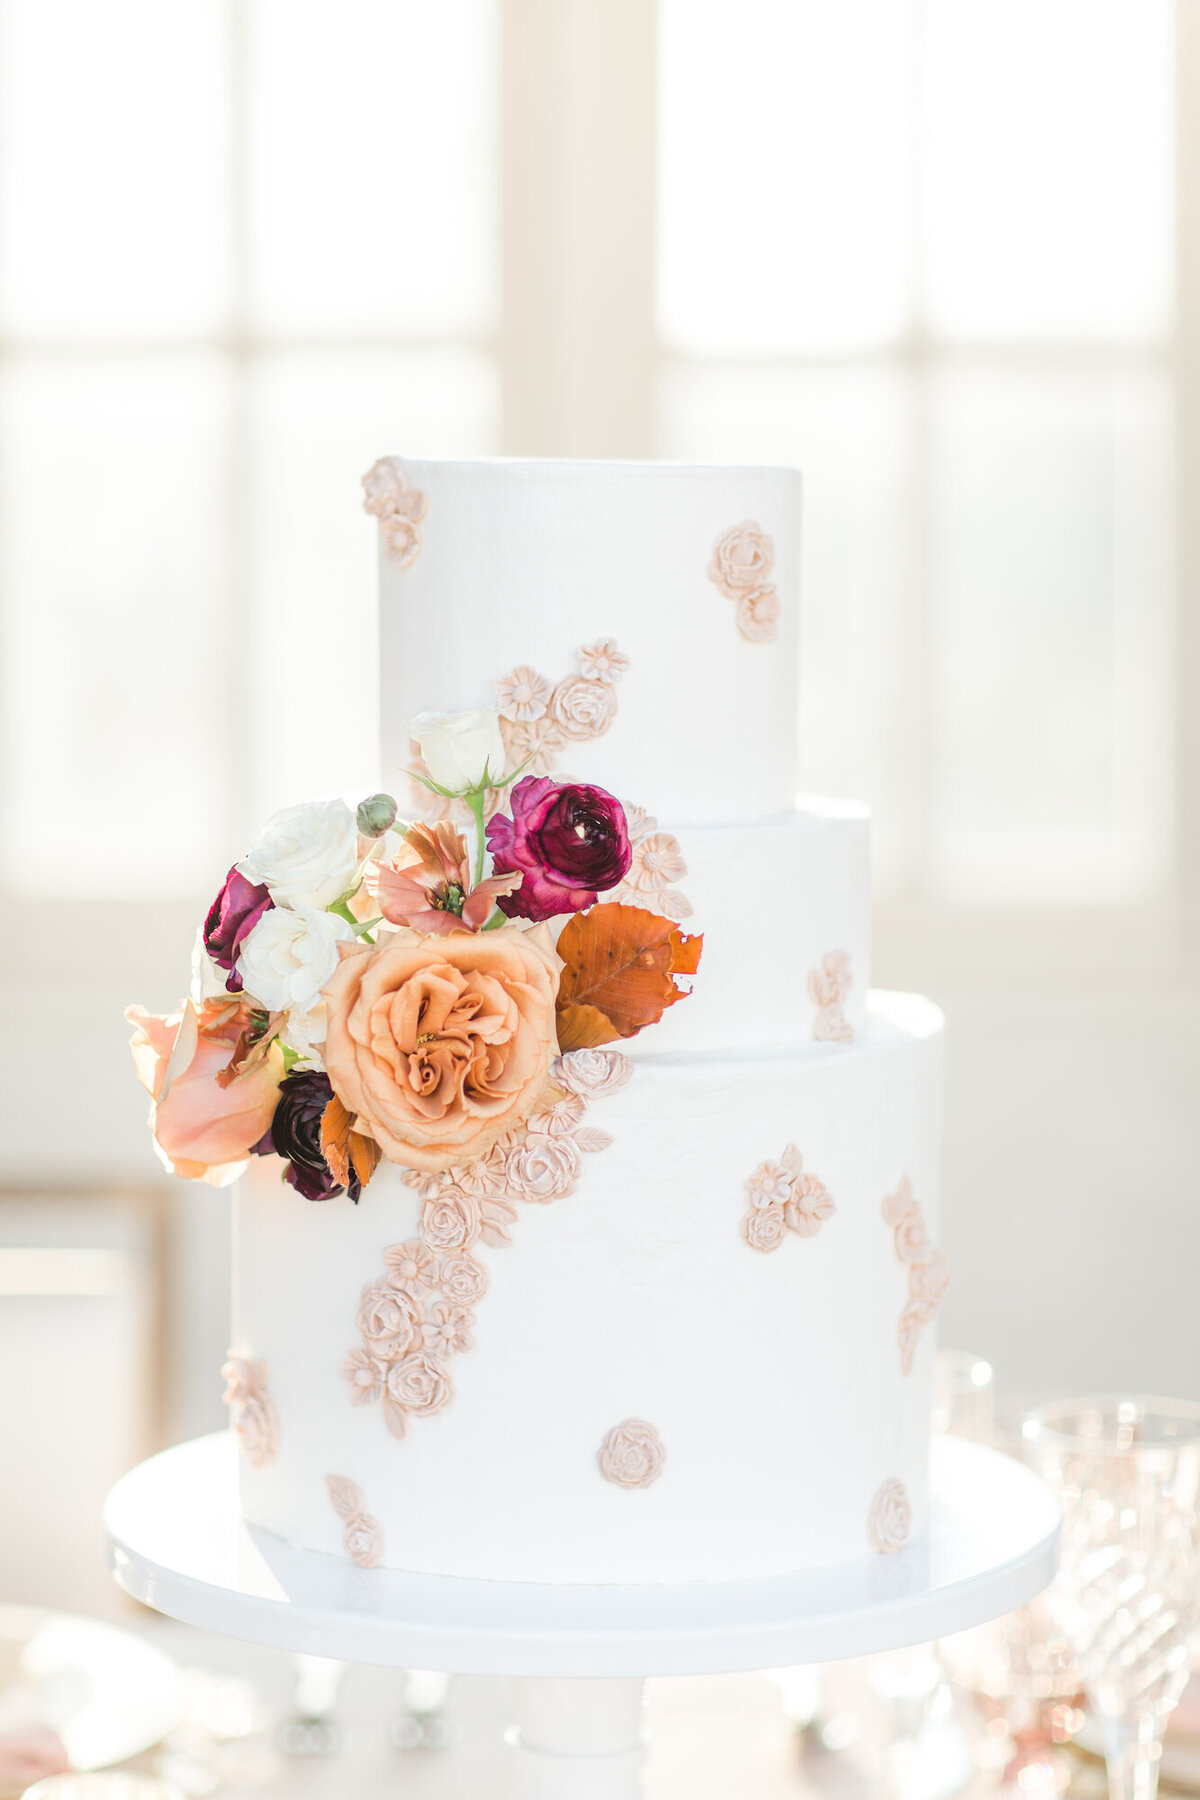 Wedding cake with lace motifs and pink and orange flowers